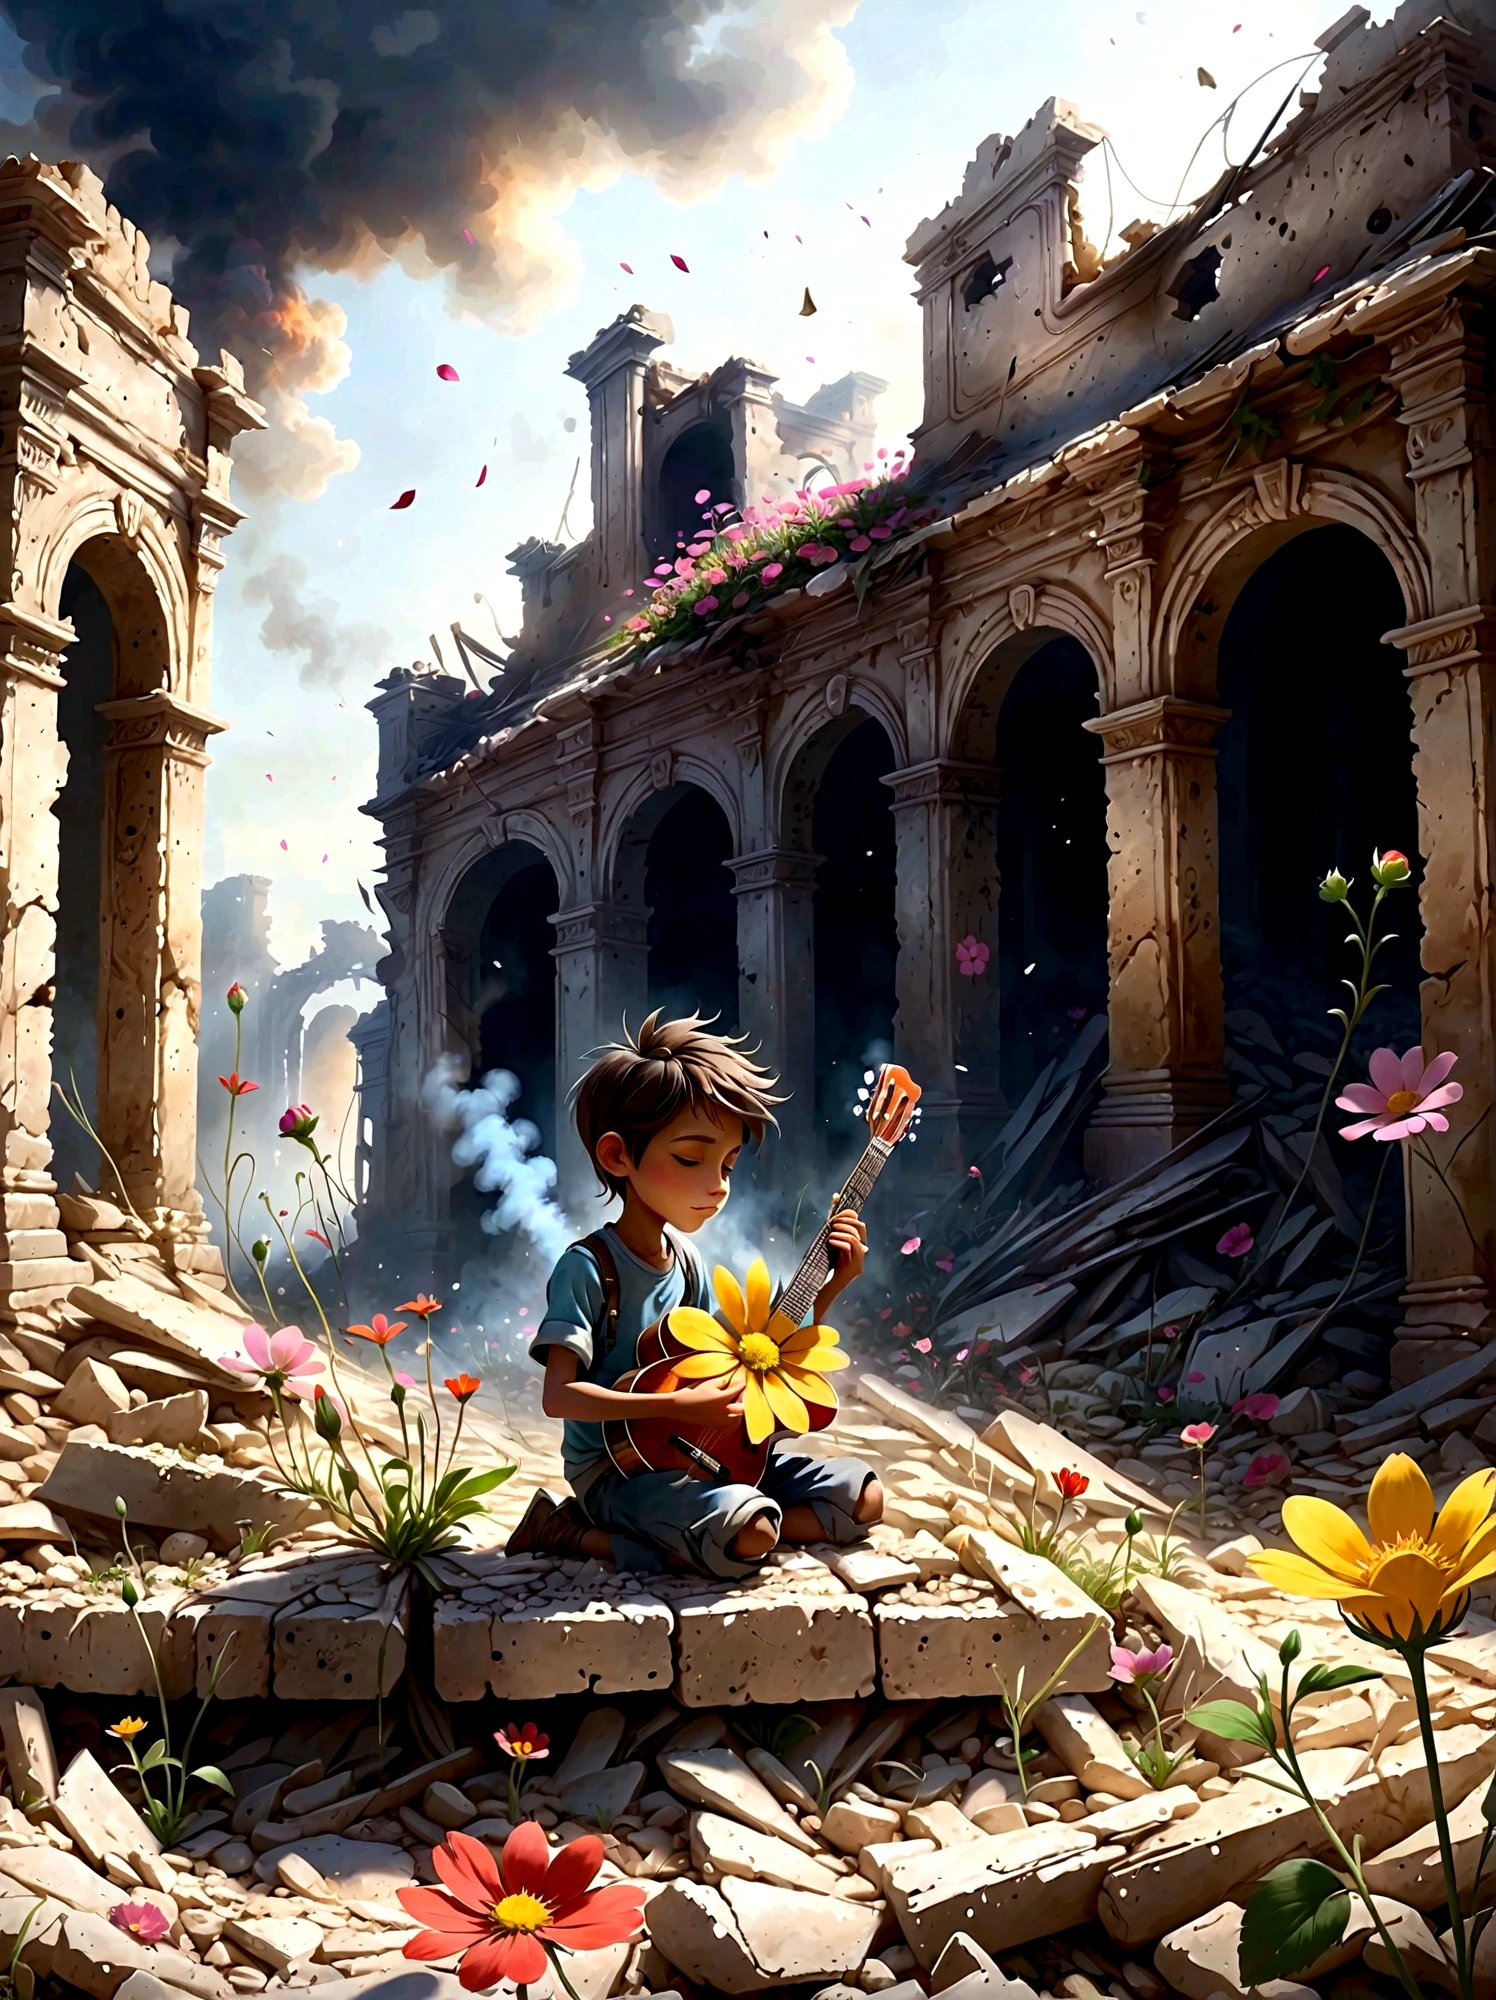 In the midst of a war-torn, smoky ruin, a child is playing a guitar. The scene captures the stark contrast between the devastation of the surroundings and the innocence of the . The ruins are filled with debris and remnants of buildings, with smoke and fire in the background. The child's expression is somber, reflecting the harsh reality of the situation. The overall mood is poignant and emotional, with muted colors and dramatic lighting to emphasize the desolation and the glimmer of hope represented by the music，(A tenacious little flower grows in the ruins:1.6)